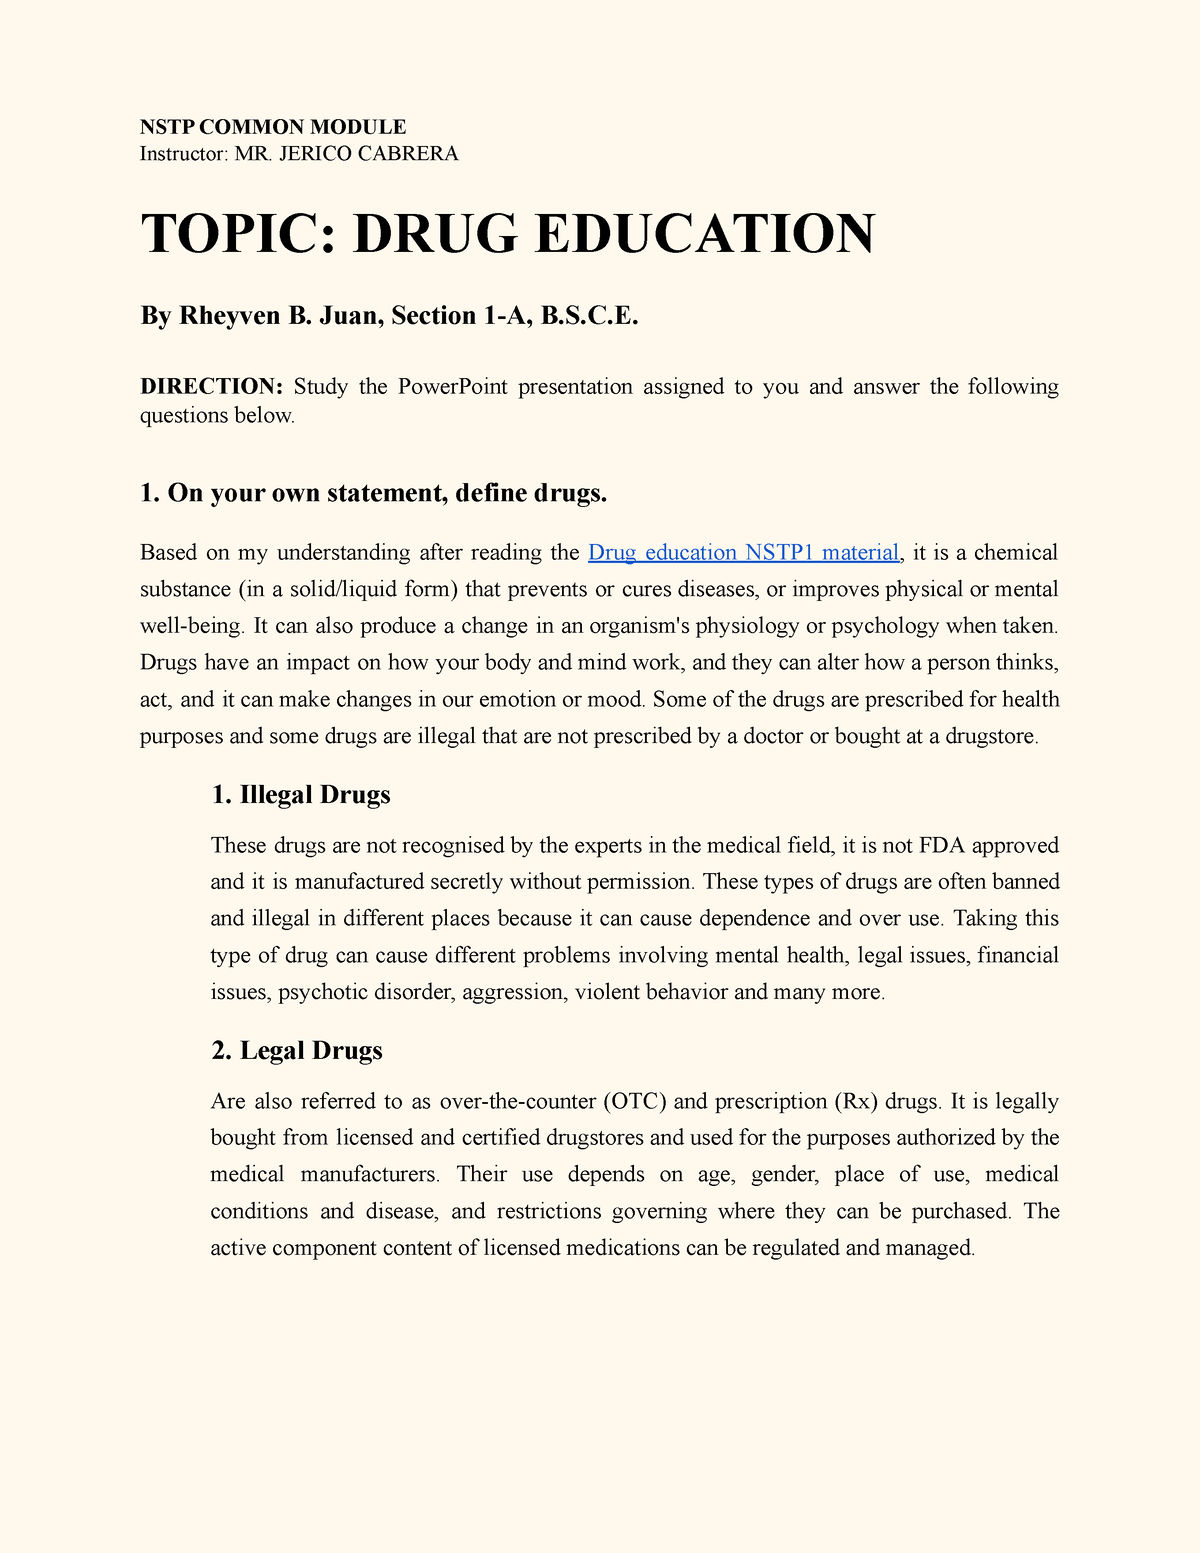 reflection paper about drug education nstp